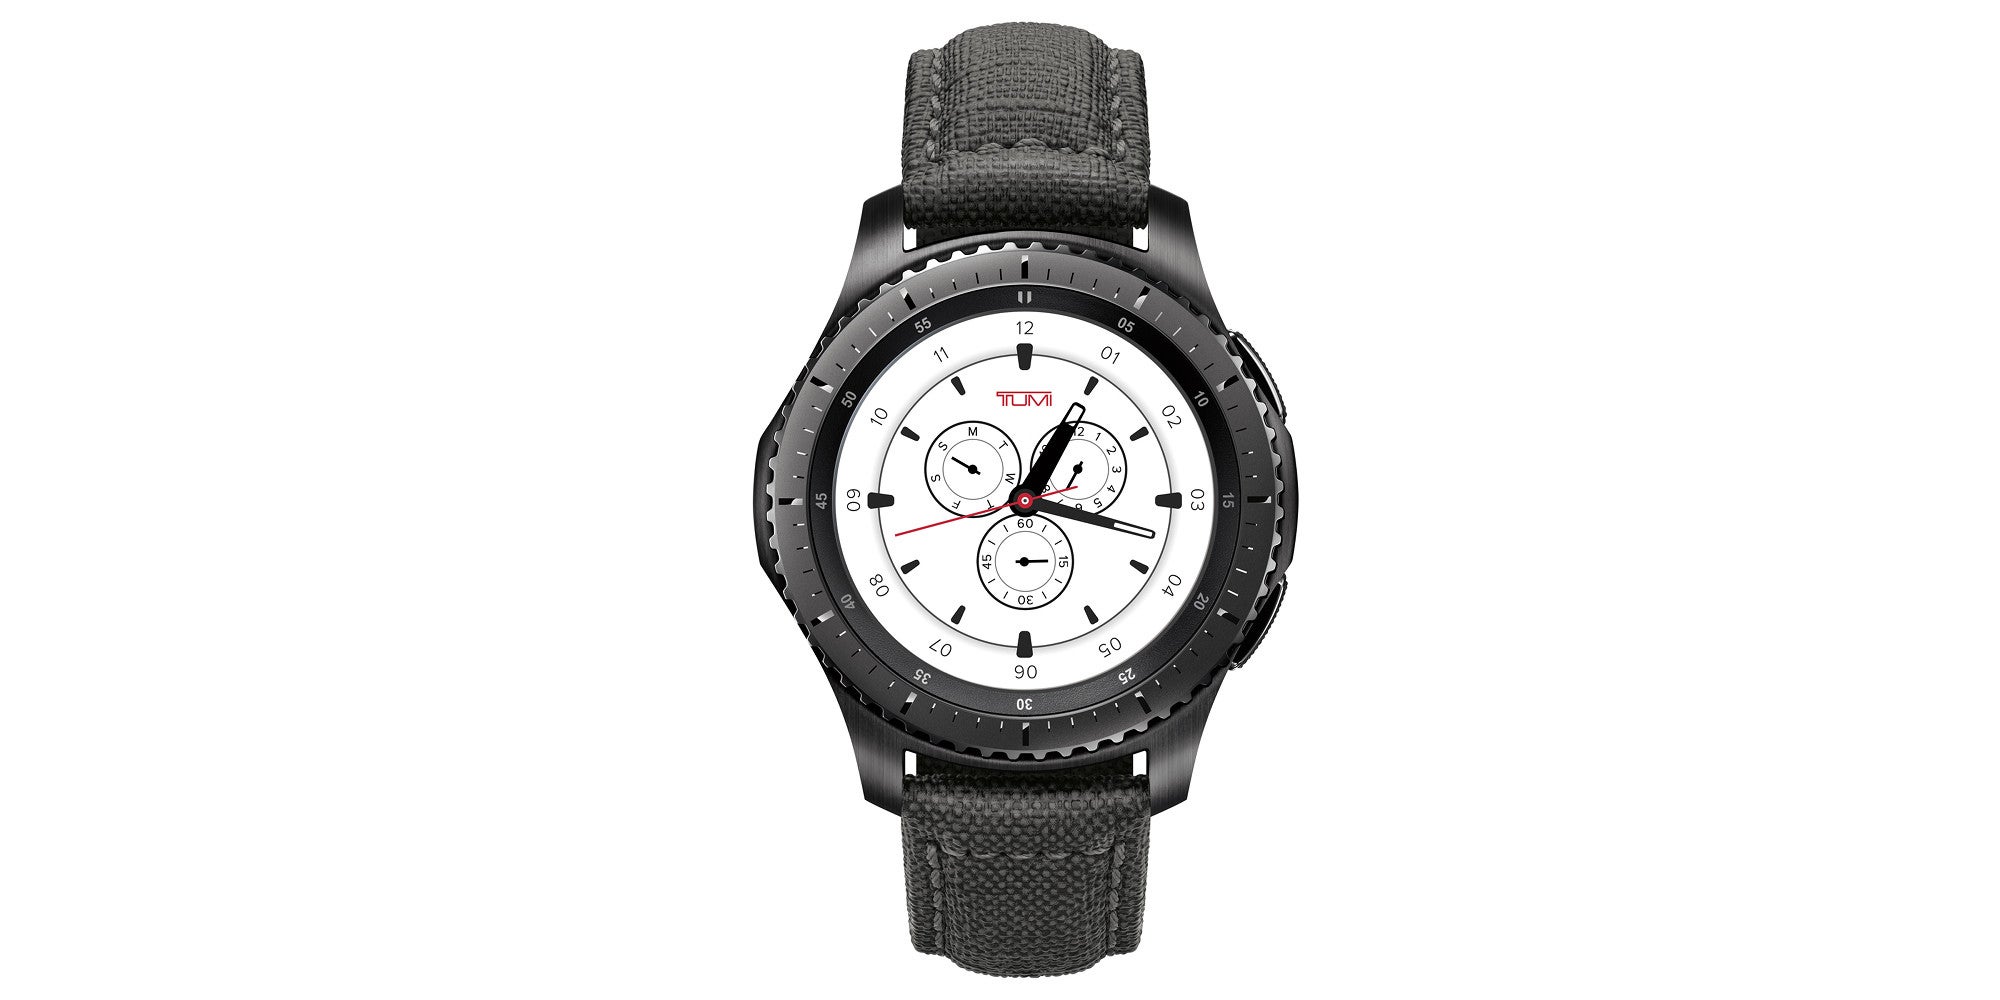 Samsung Gear S3 frontier TUMI Special Edition - Samsung launches the Gear S3 TUMI Special Edition smartwatch for $449.99